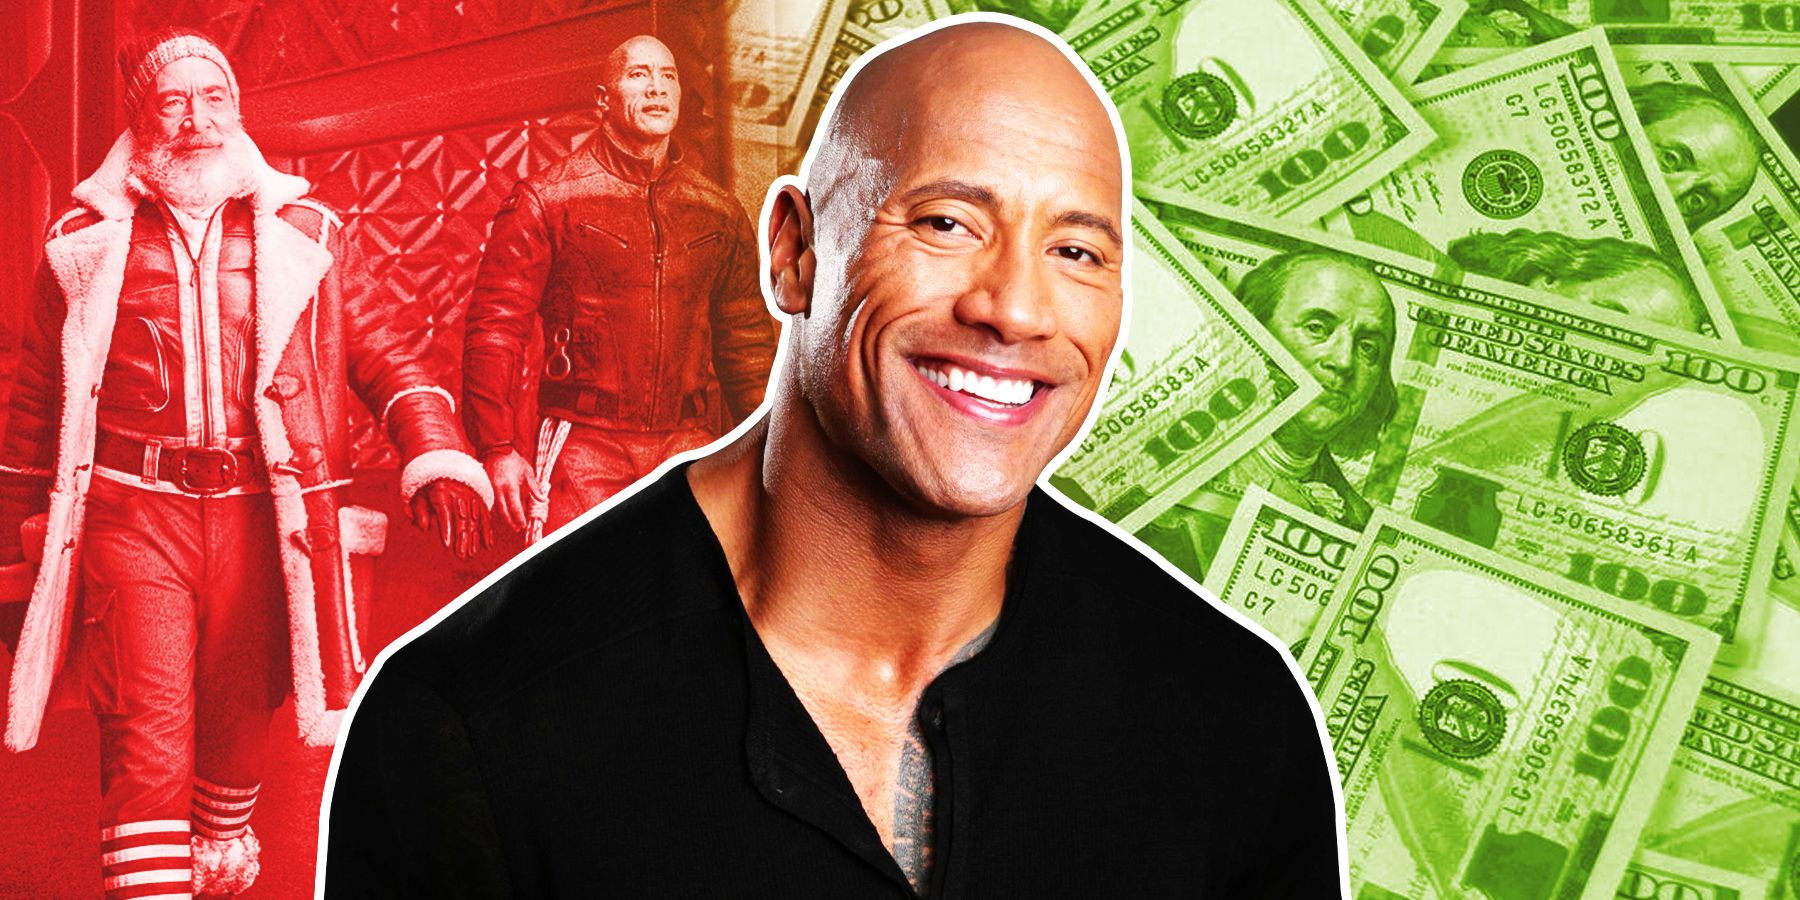 What is Red One starring Dwayne Johnson about?